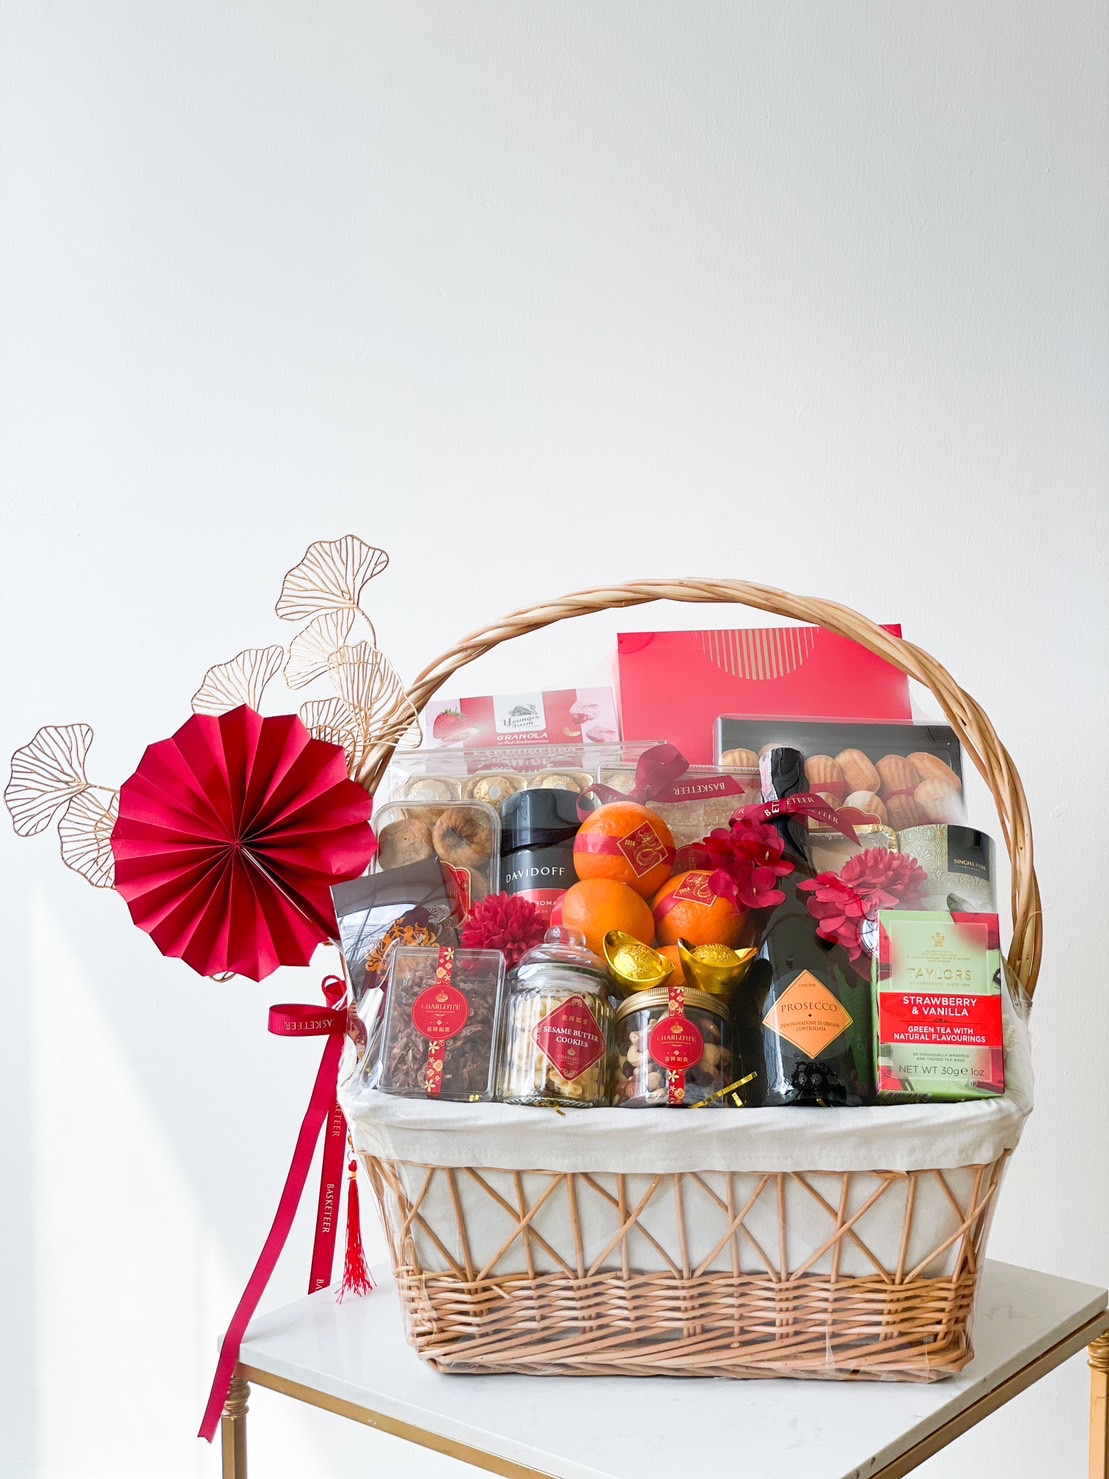 Wine, Mandarin Orange, Cookies, Tea and Many Treats Delicious Chinese New Year In The Basket